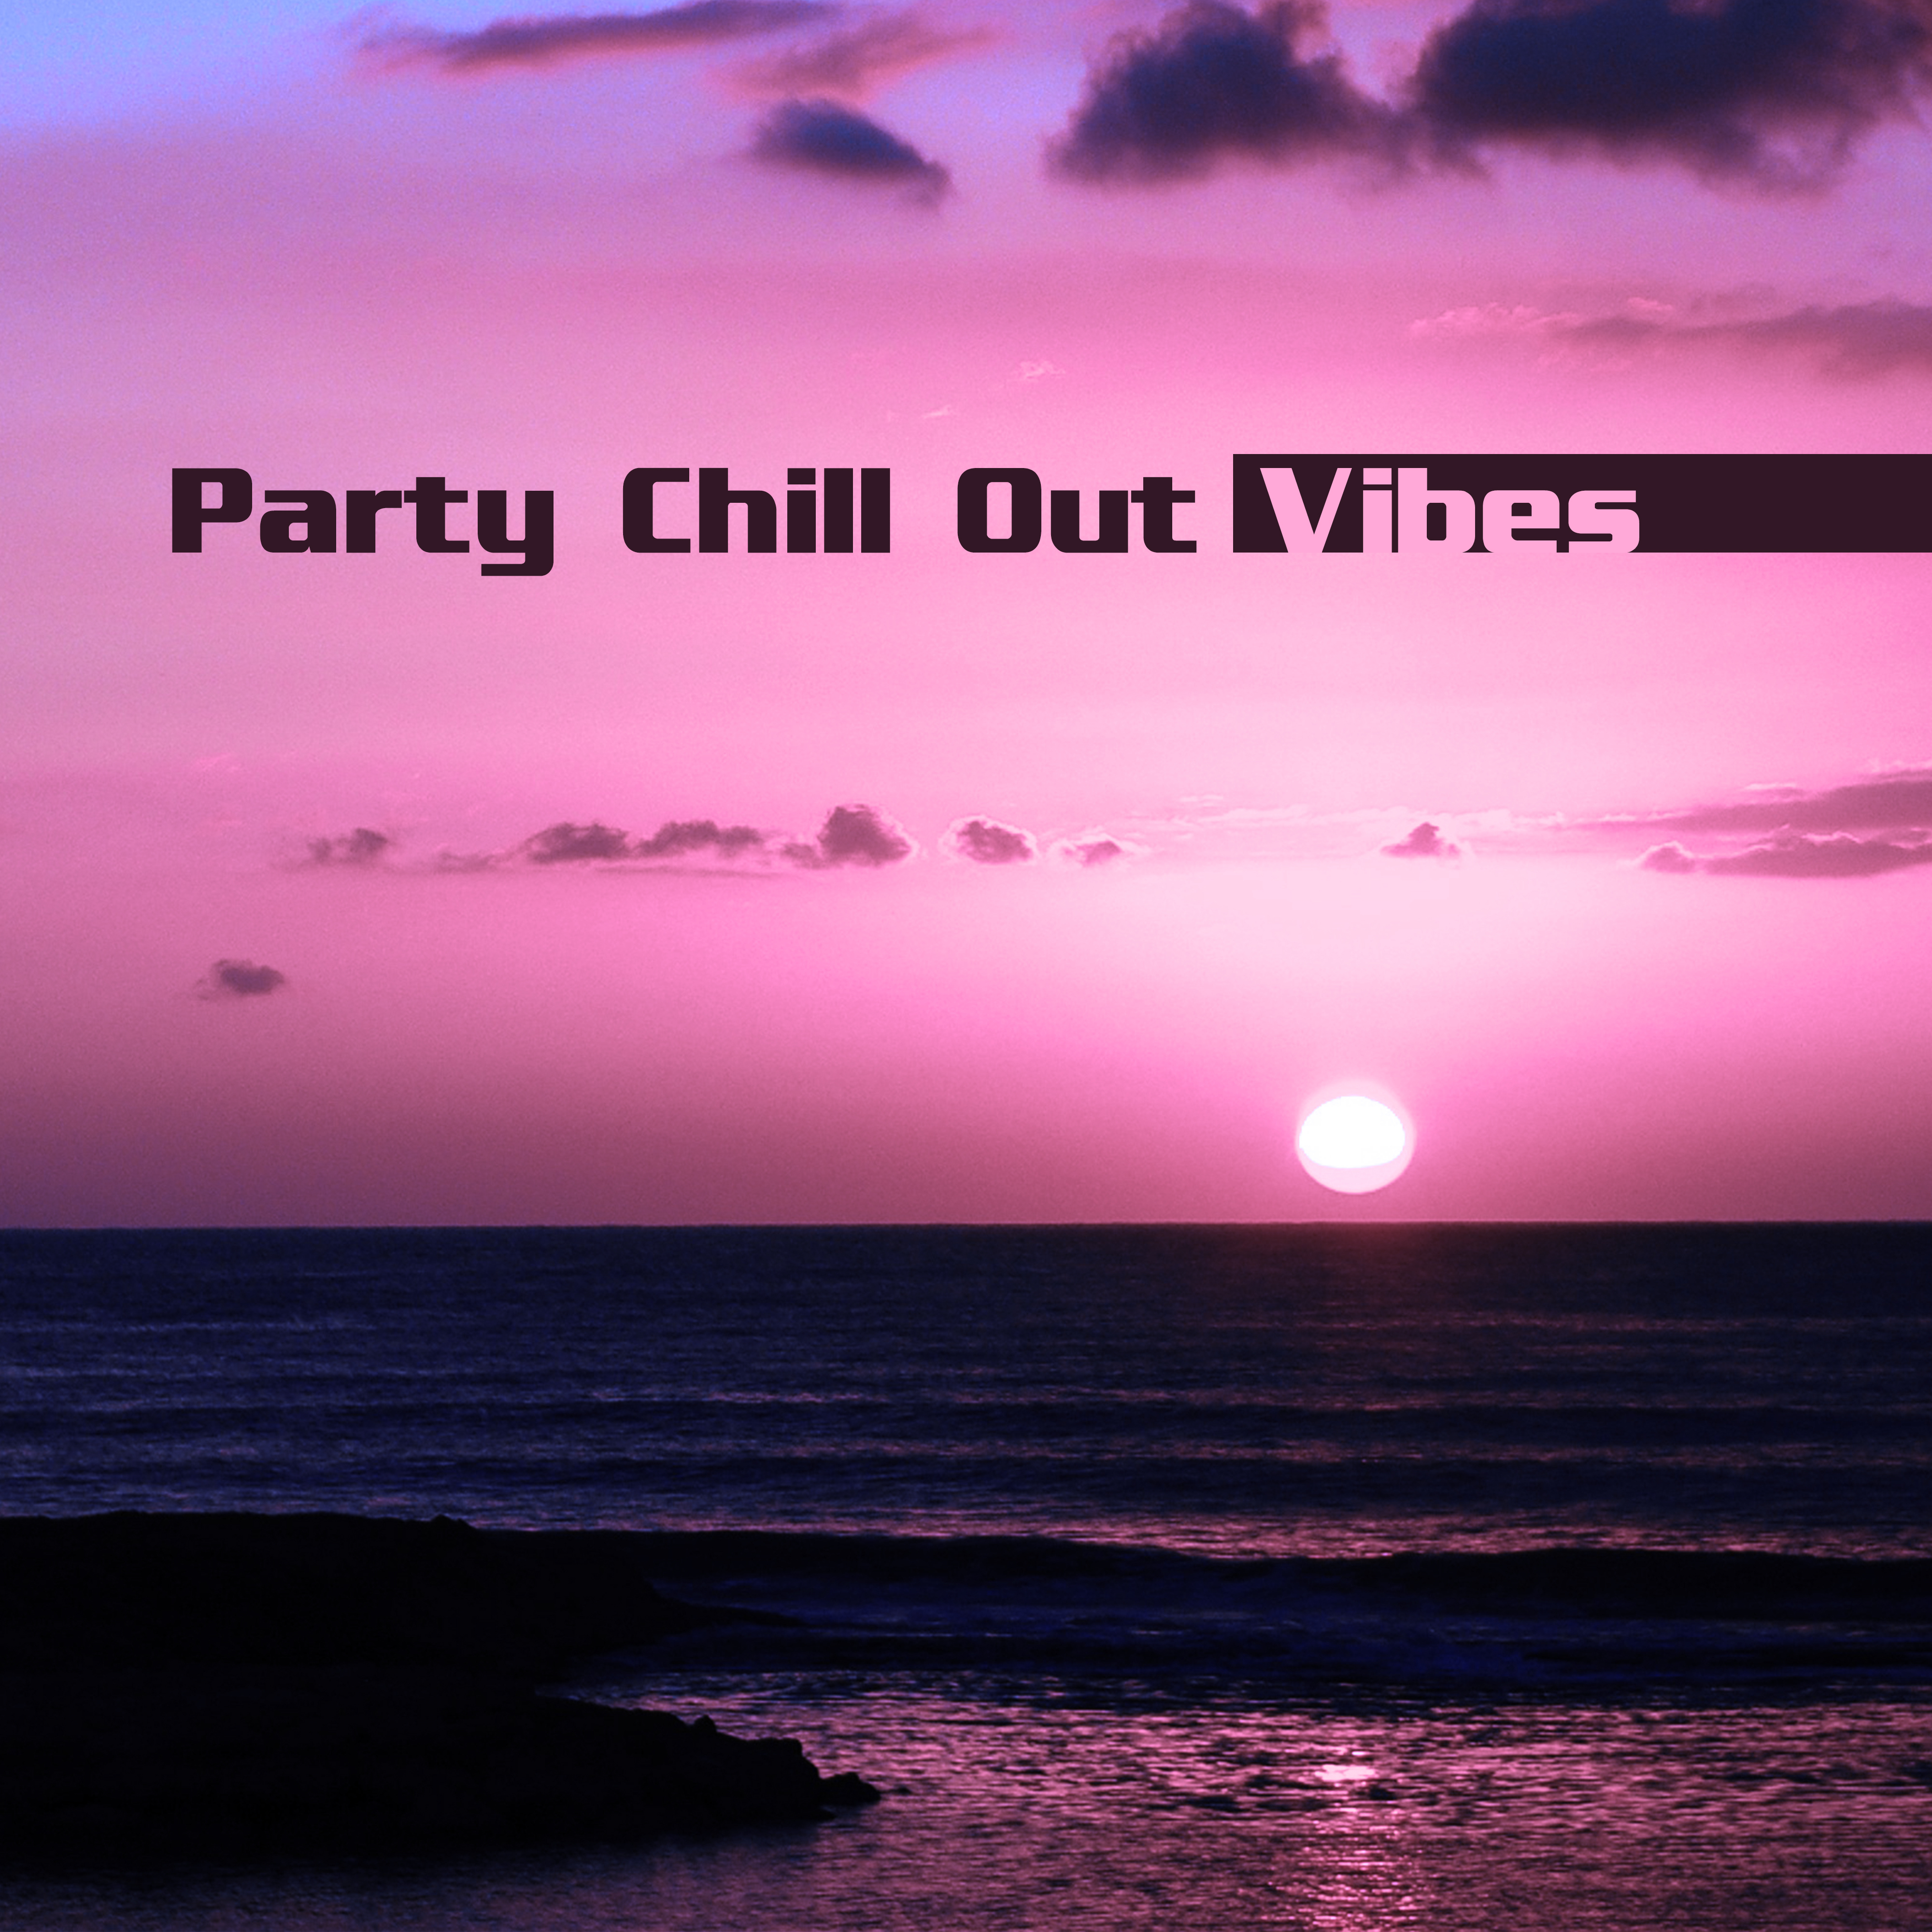 Party Chill Out Vibes – Ibiza Party Time, Chill Out Beach Music, Evening Sounds